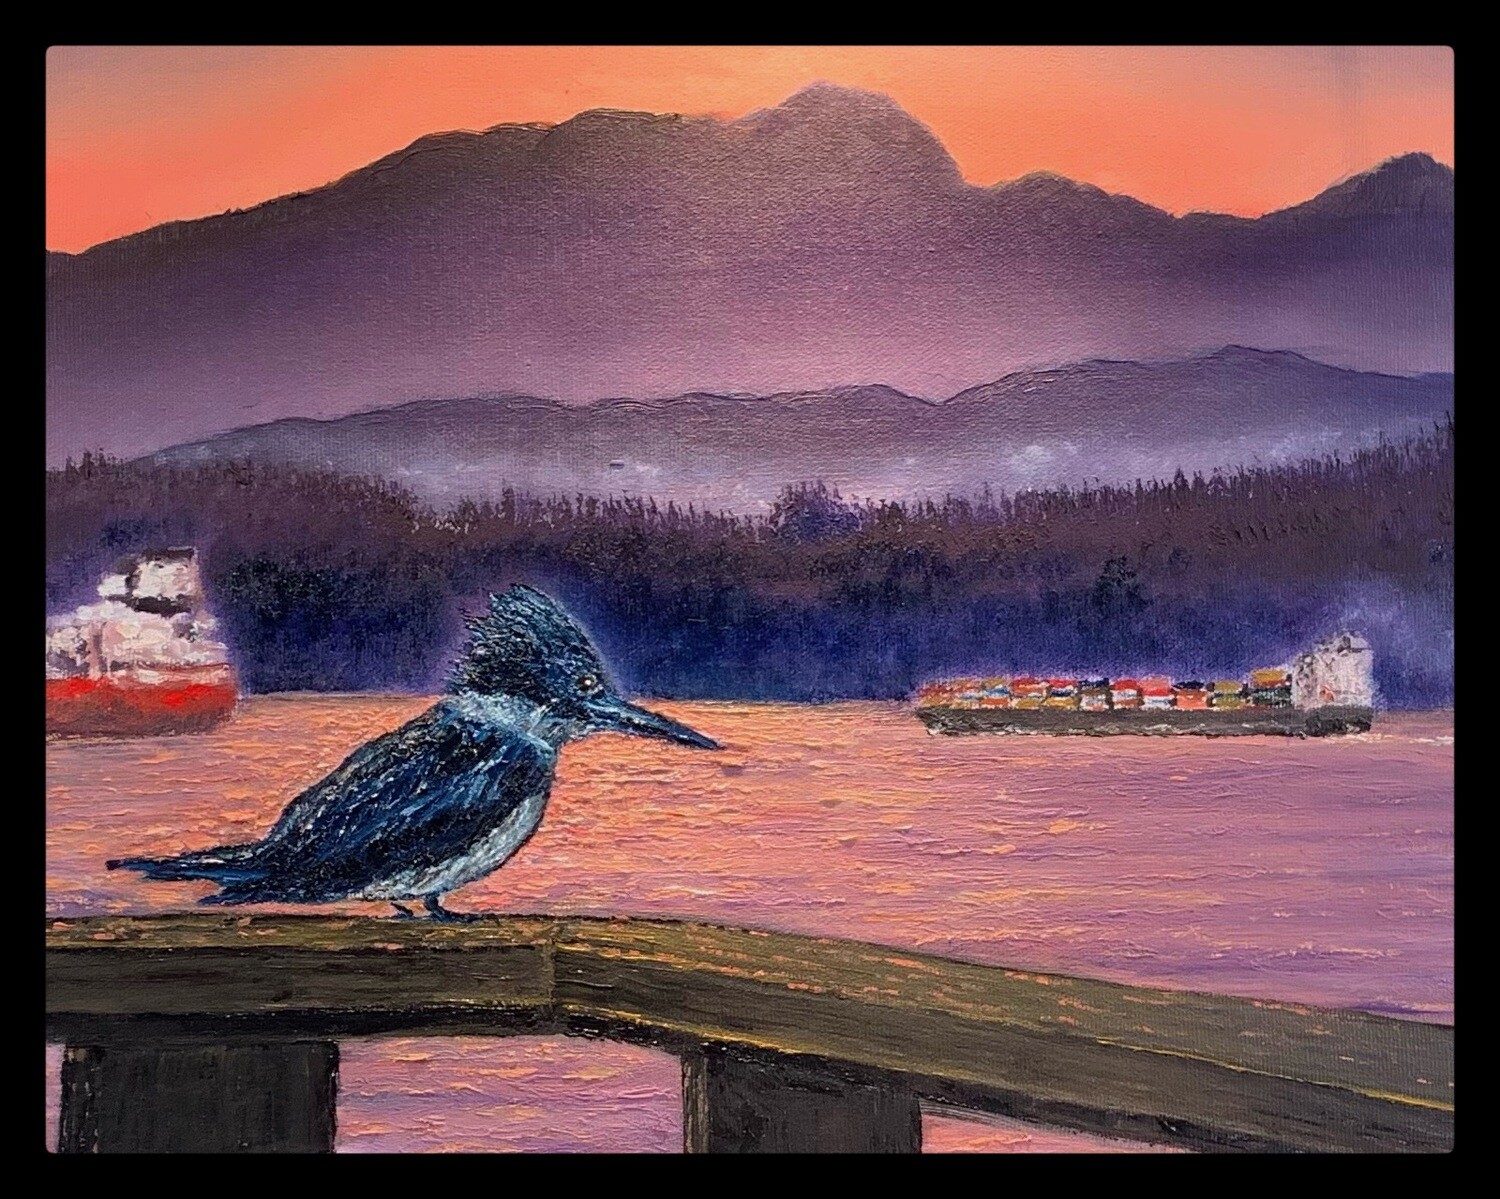 "The Kingfisher – Vancouver, BC"